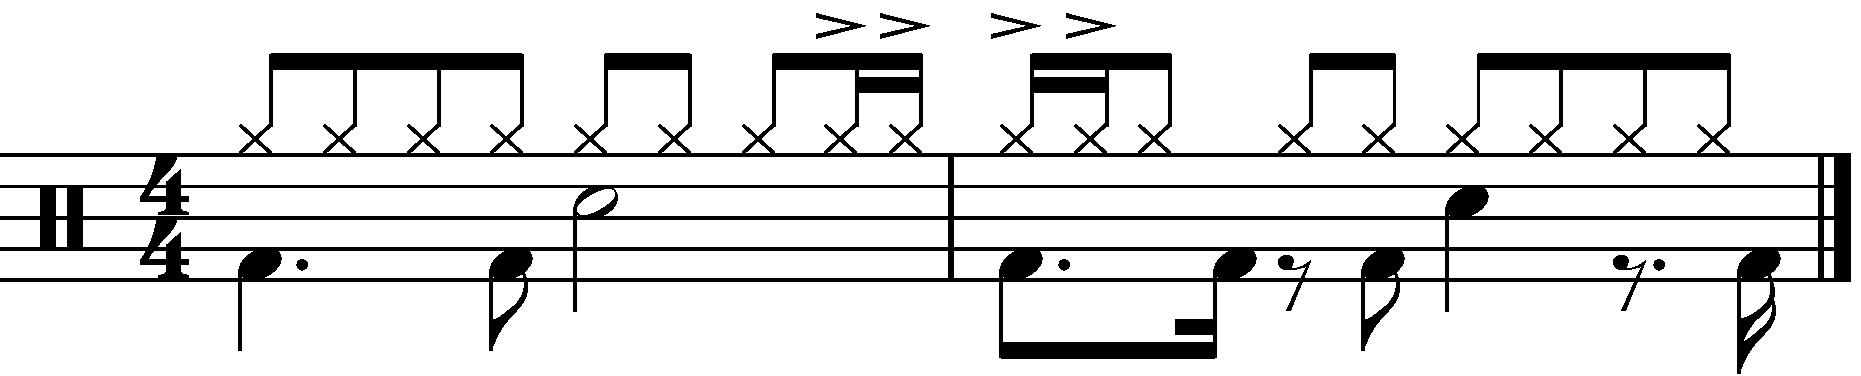 A two bar groove with staggered 16th note hi hat decoration